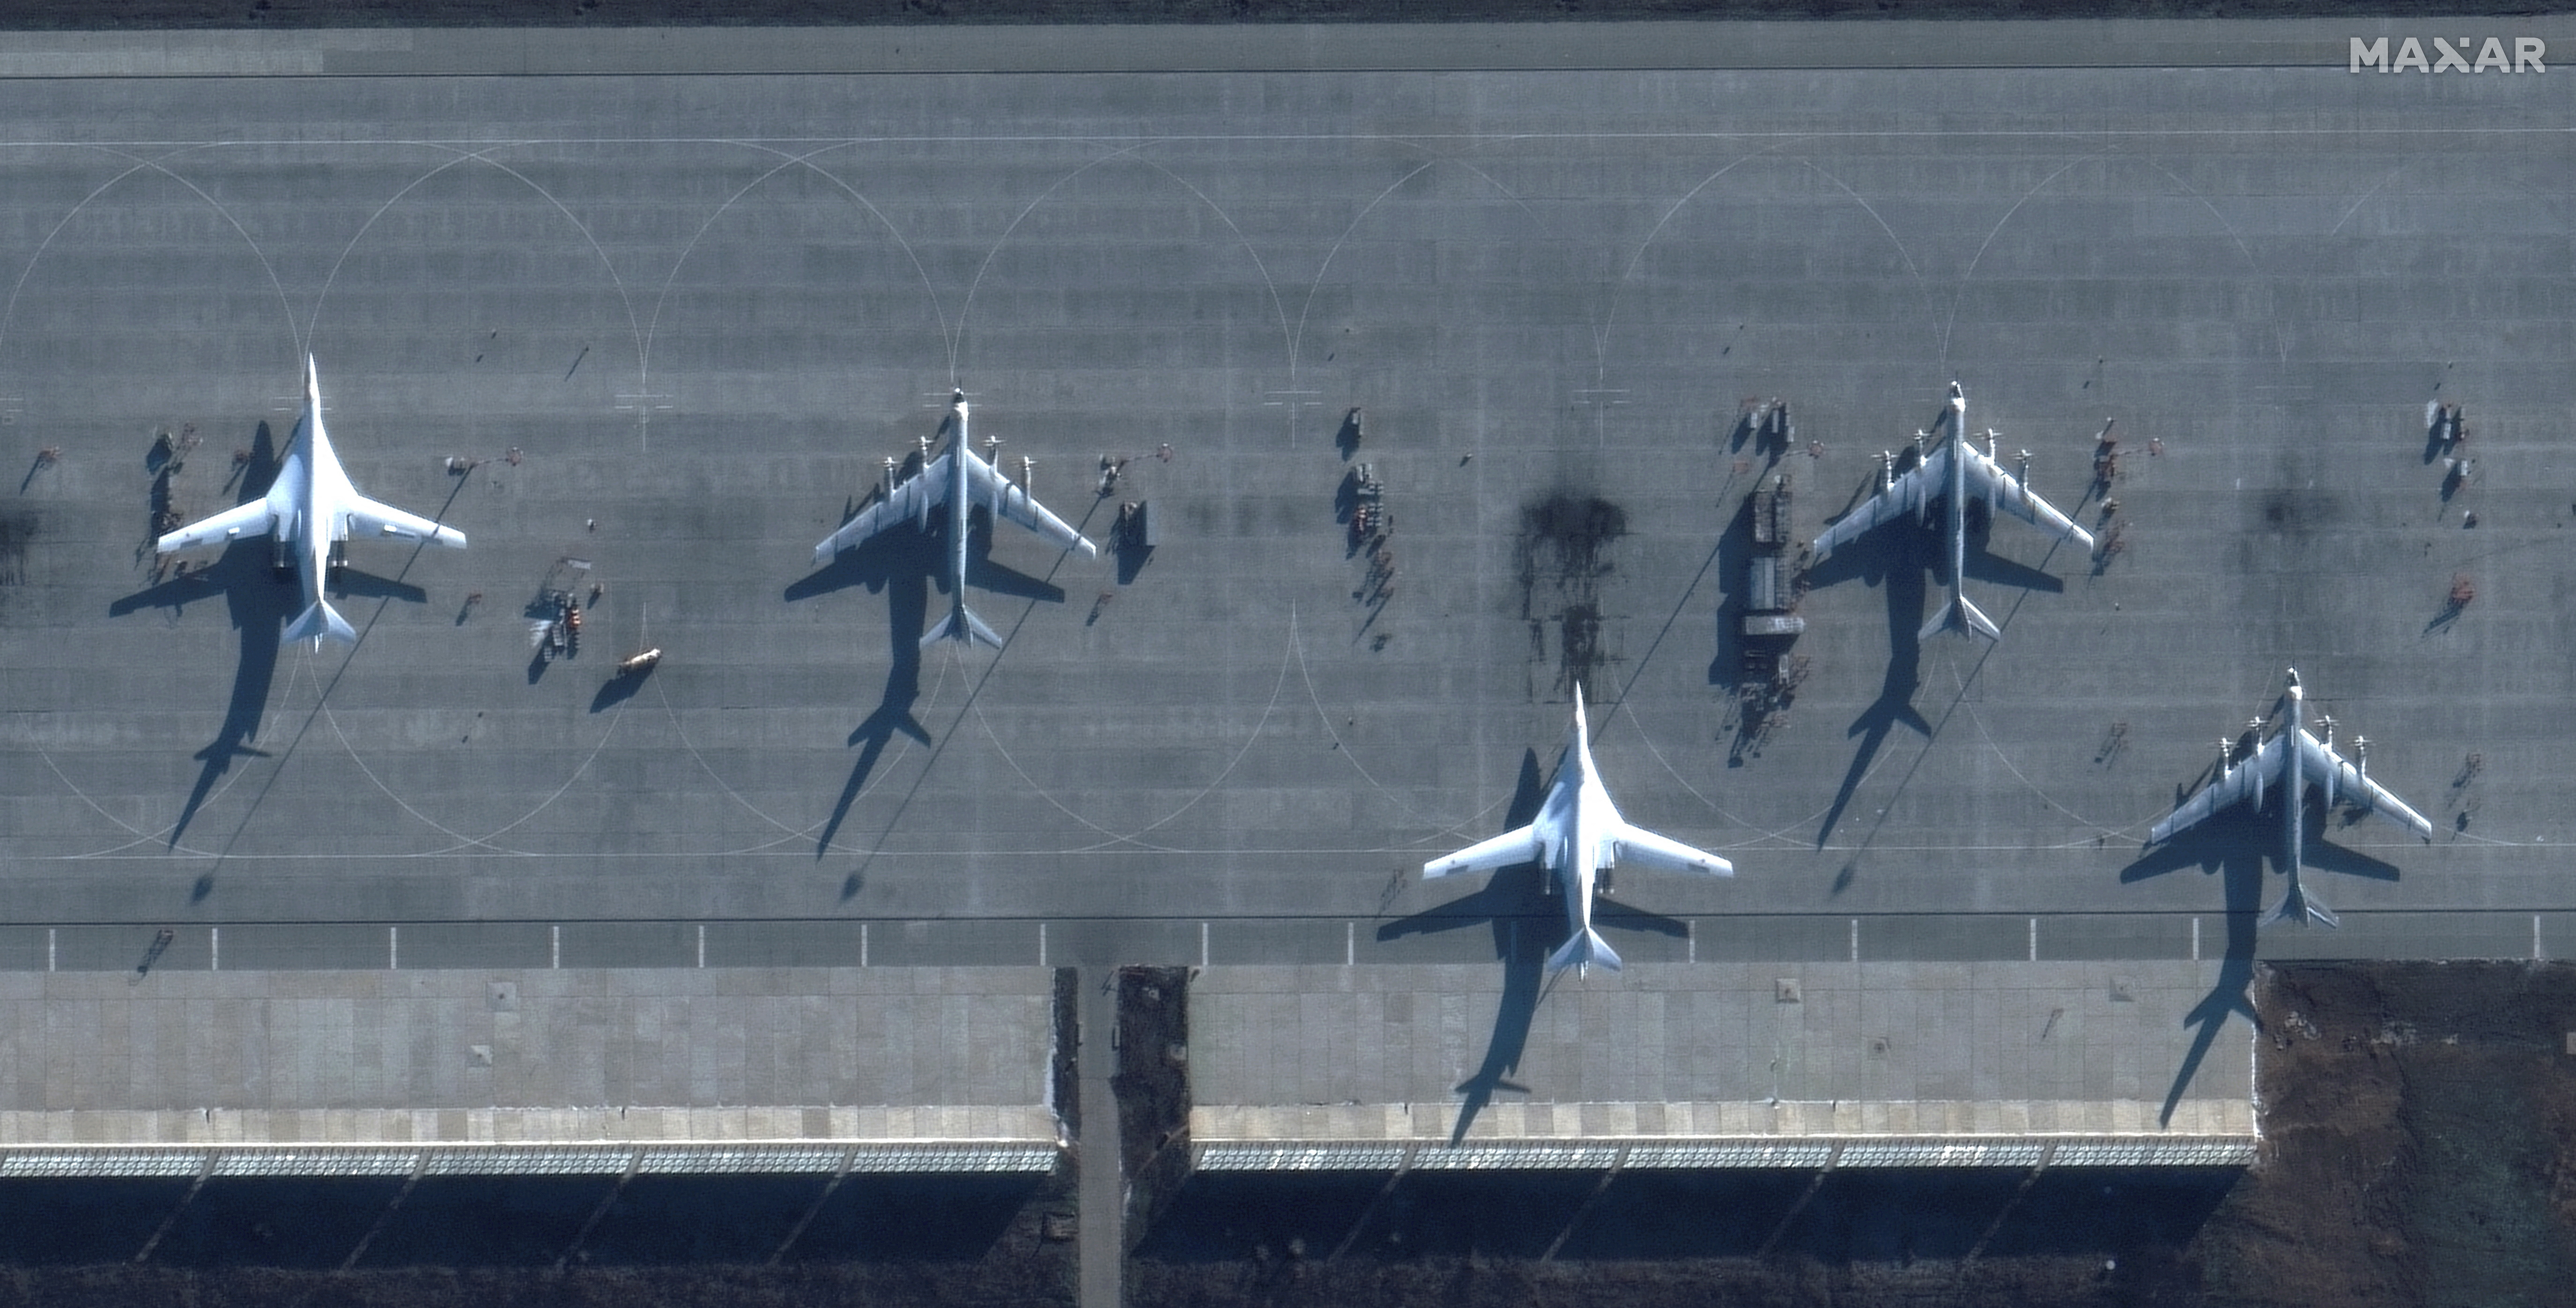 A satellite image shows bomber aircrafts at Engels Air Base in Saratov